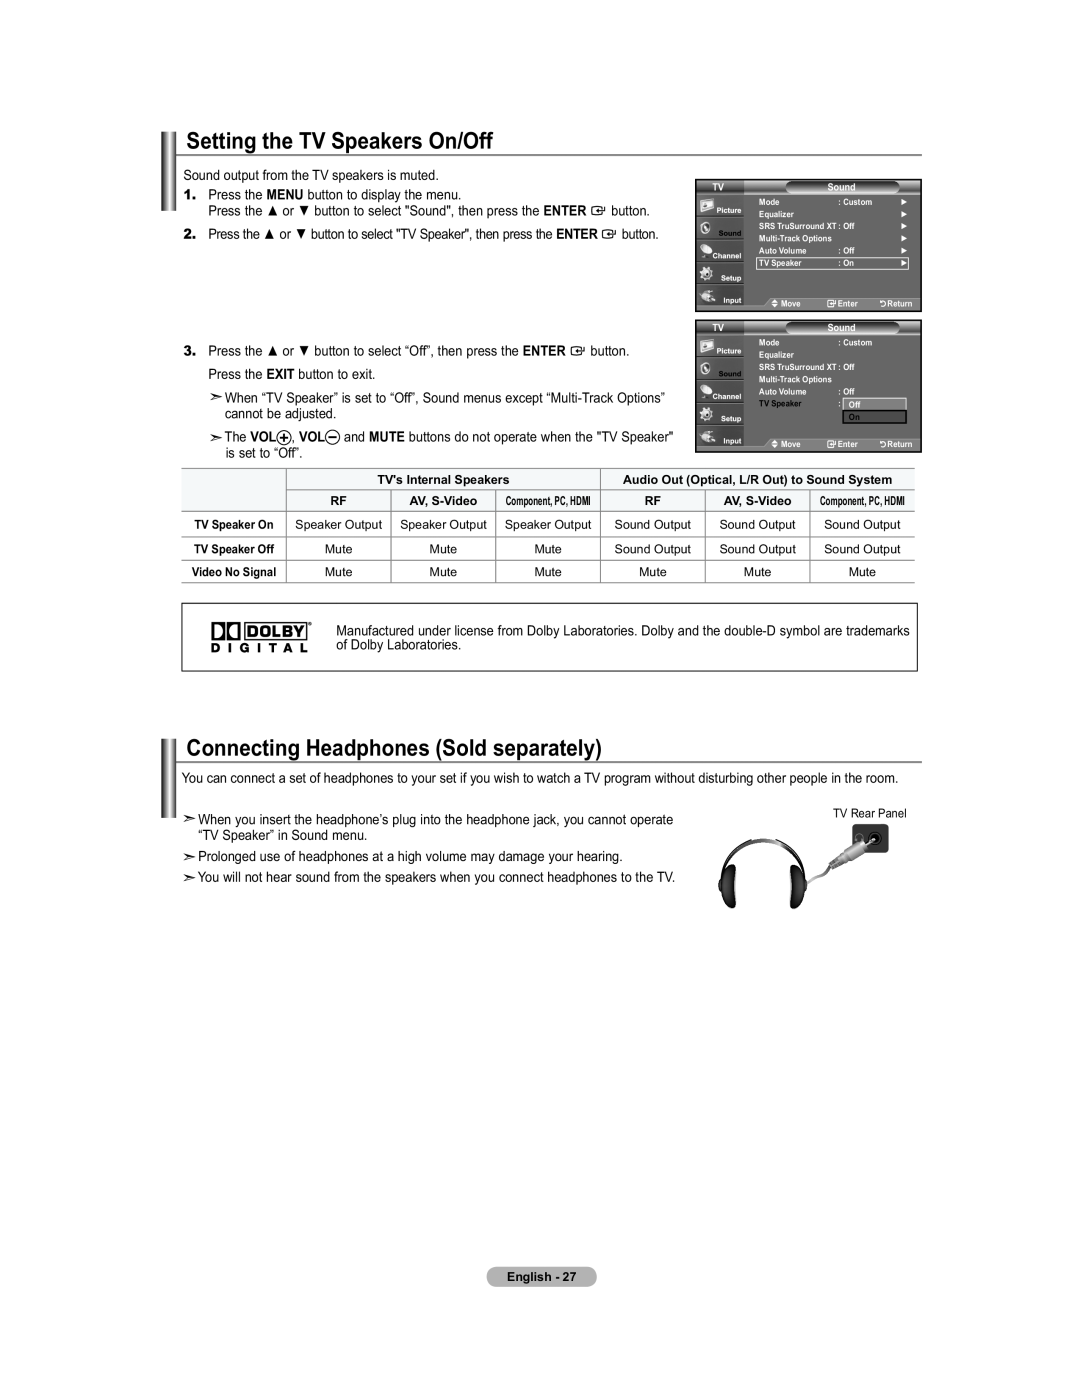 Samsung 451 user manual Setting the TV Speakers On/Off, Connecting Headphones Sold separately, Press the 